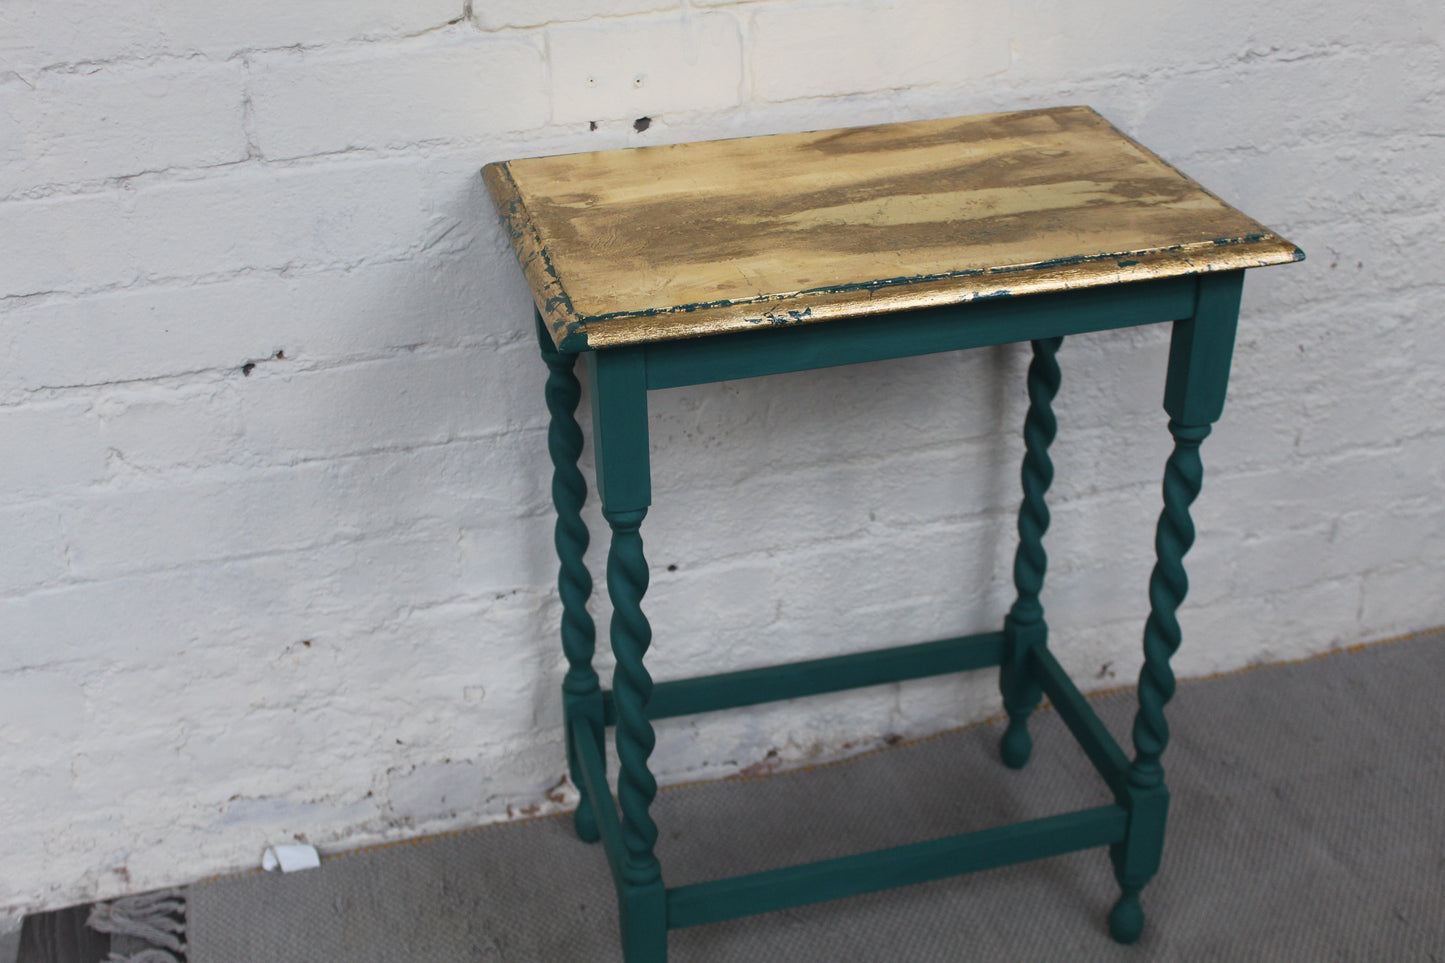 Green table with barley twist legs that has a gold leaf finished gloss top